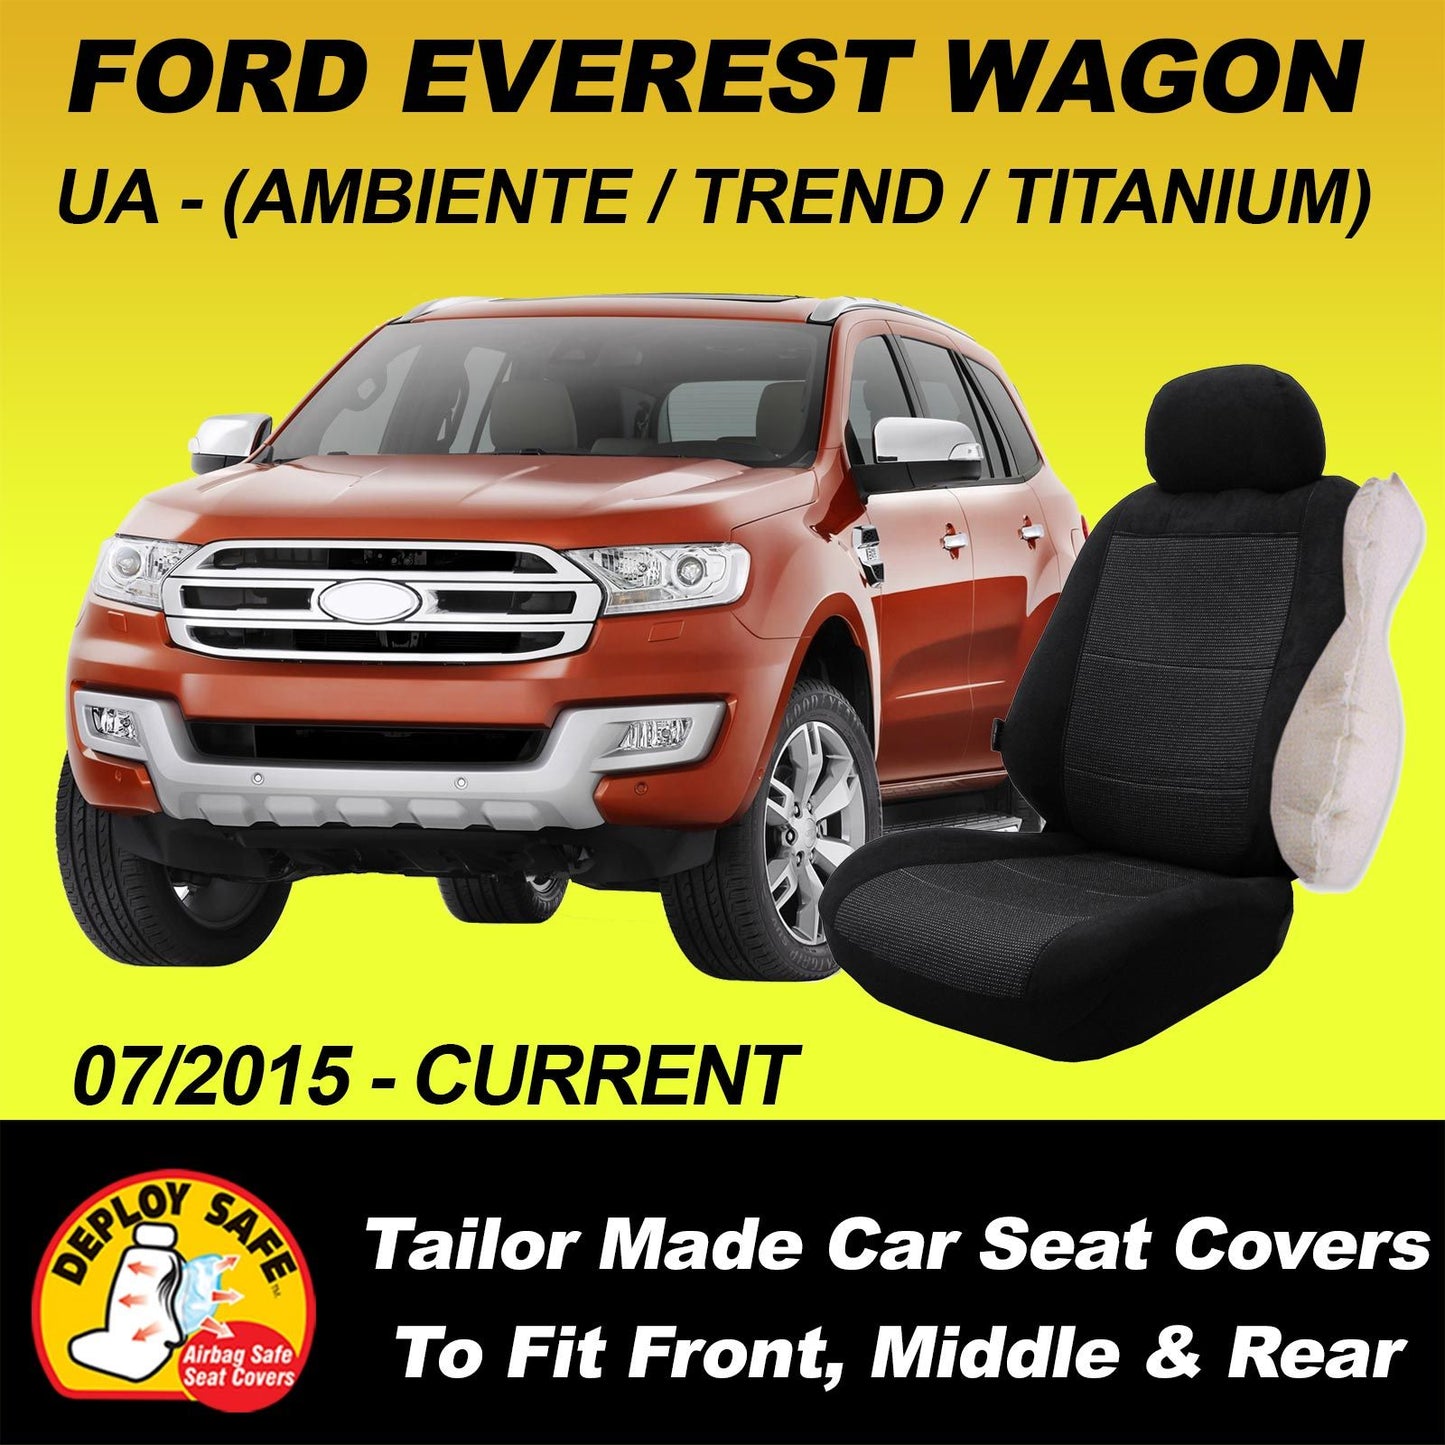 Ford Everest Wagon